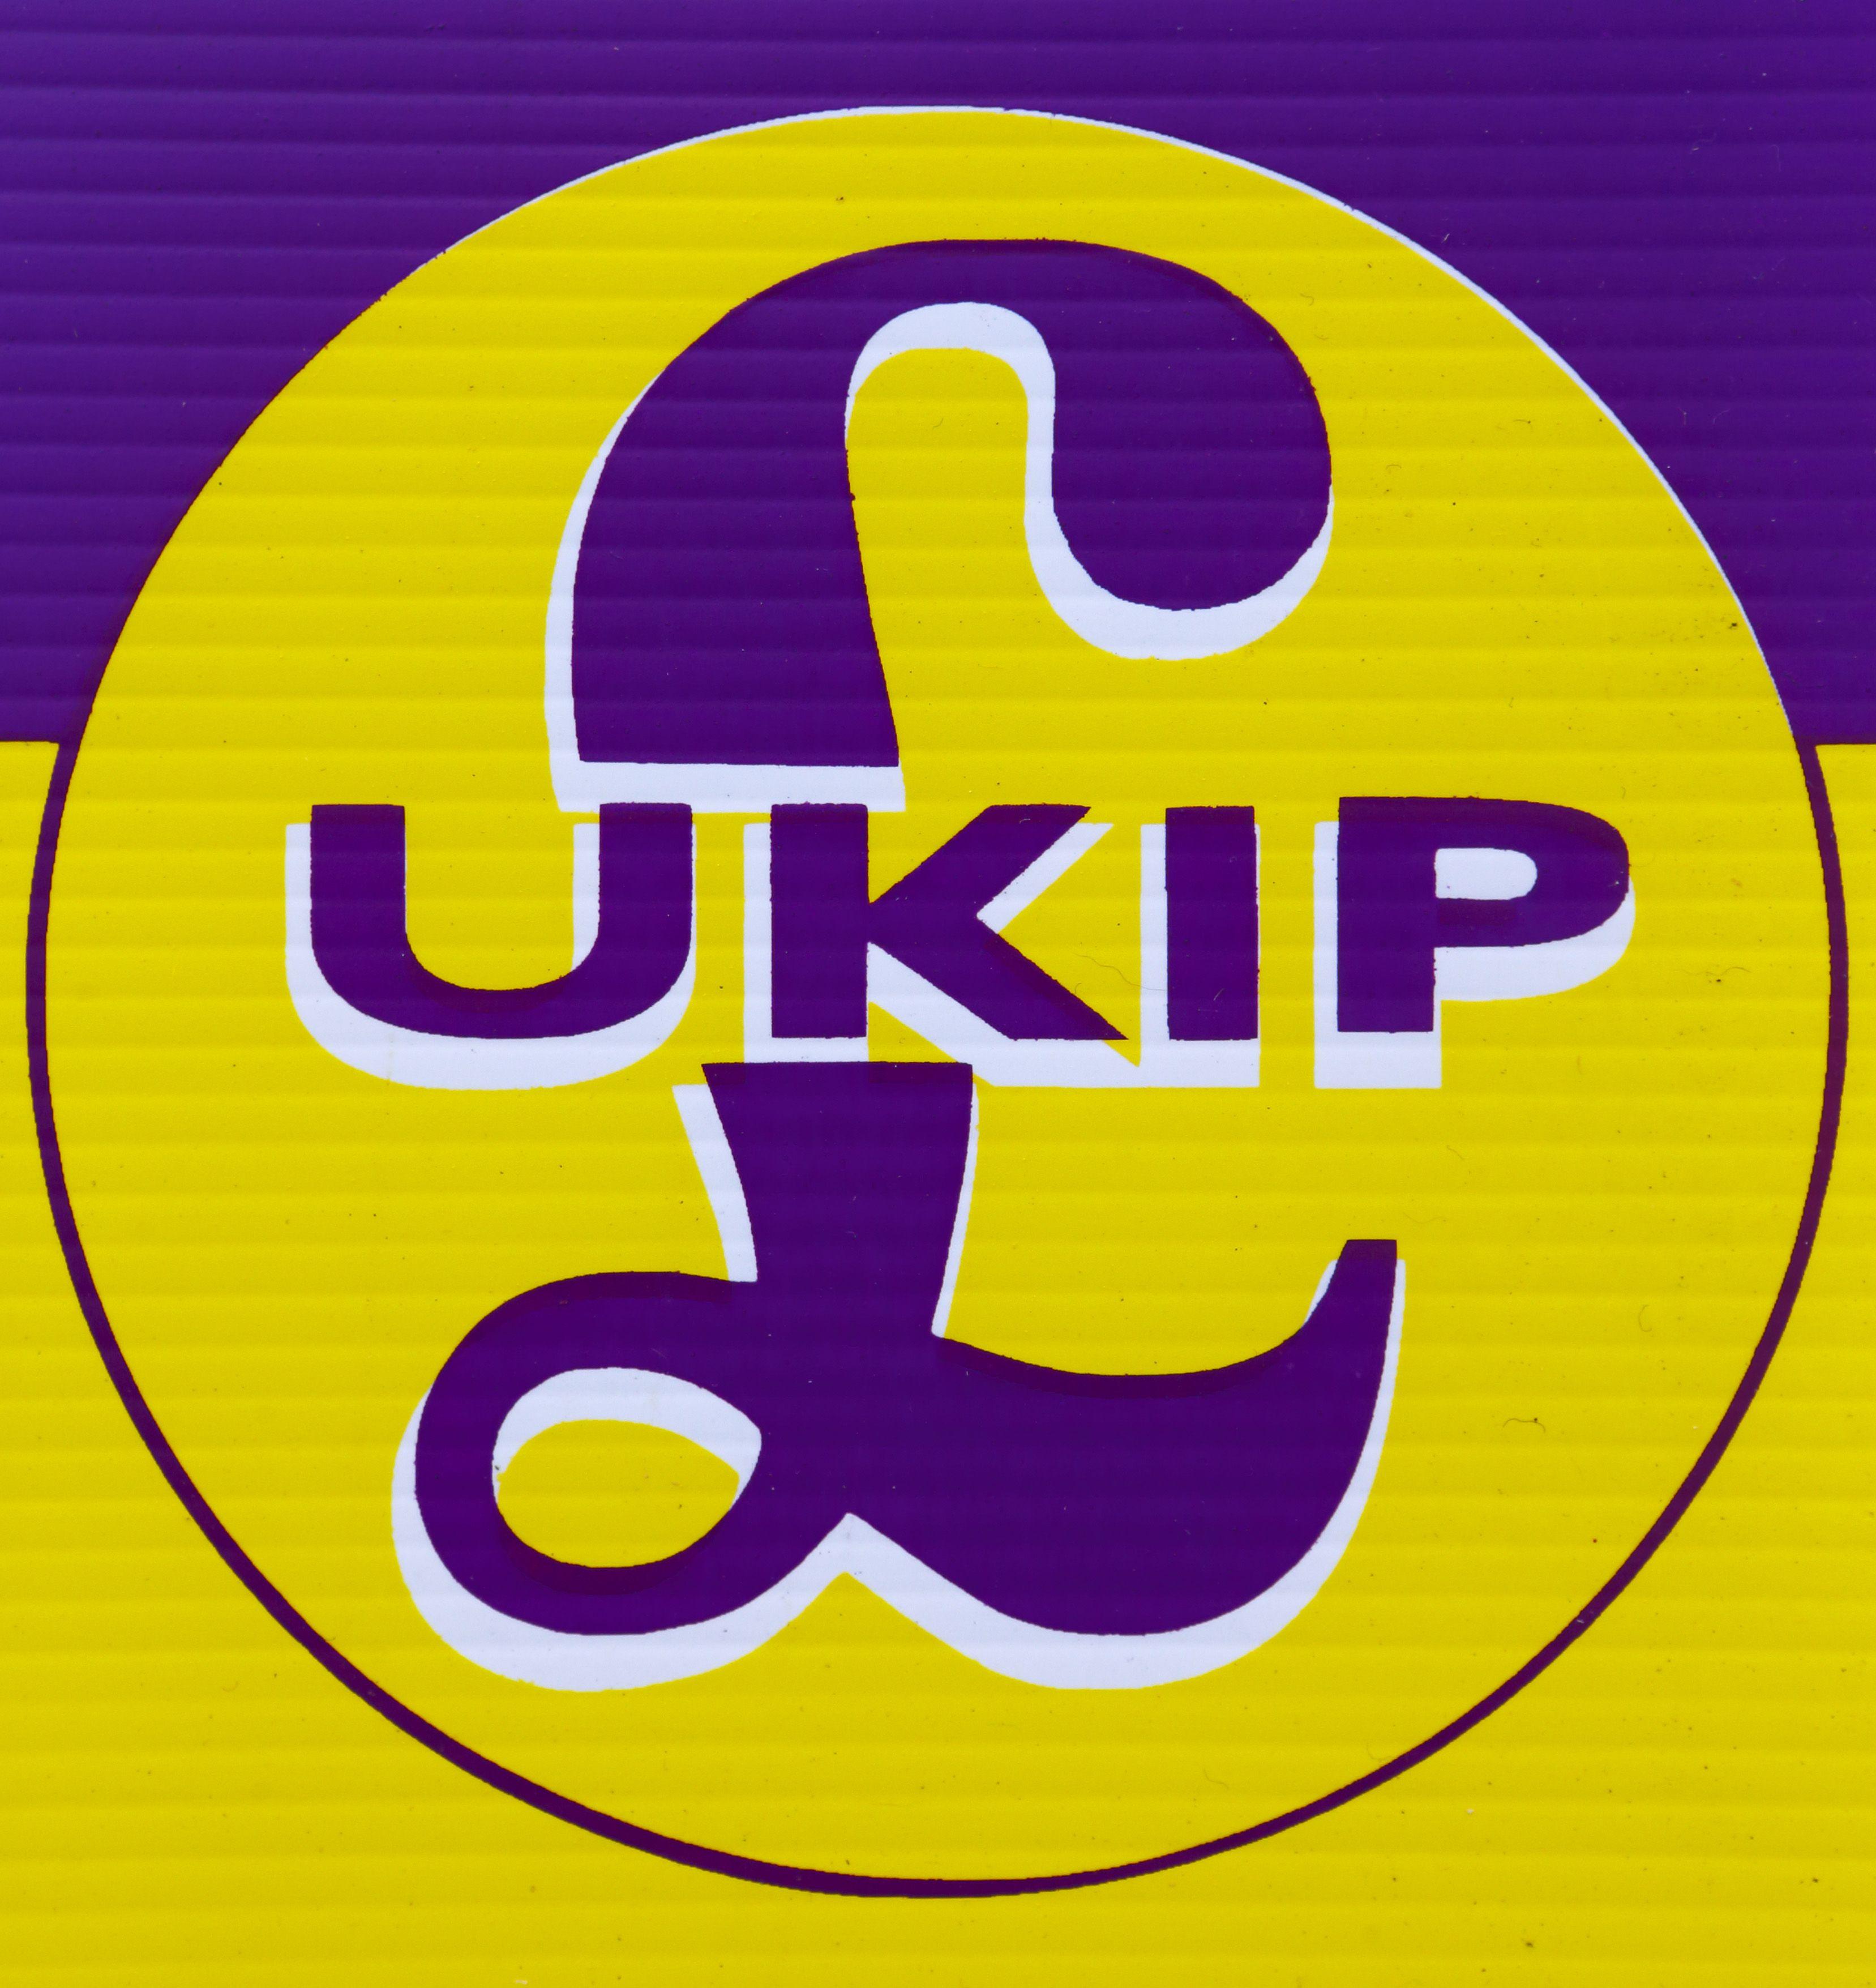 Yellow and Purple Lion Logo - All the reaction to Ukip's new logo as the Premier League seeks